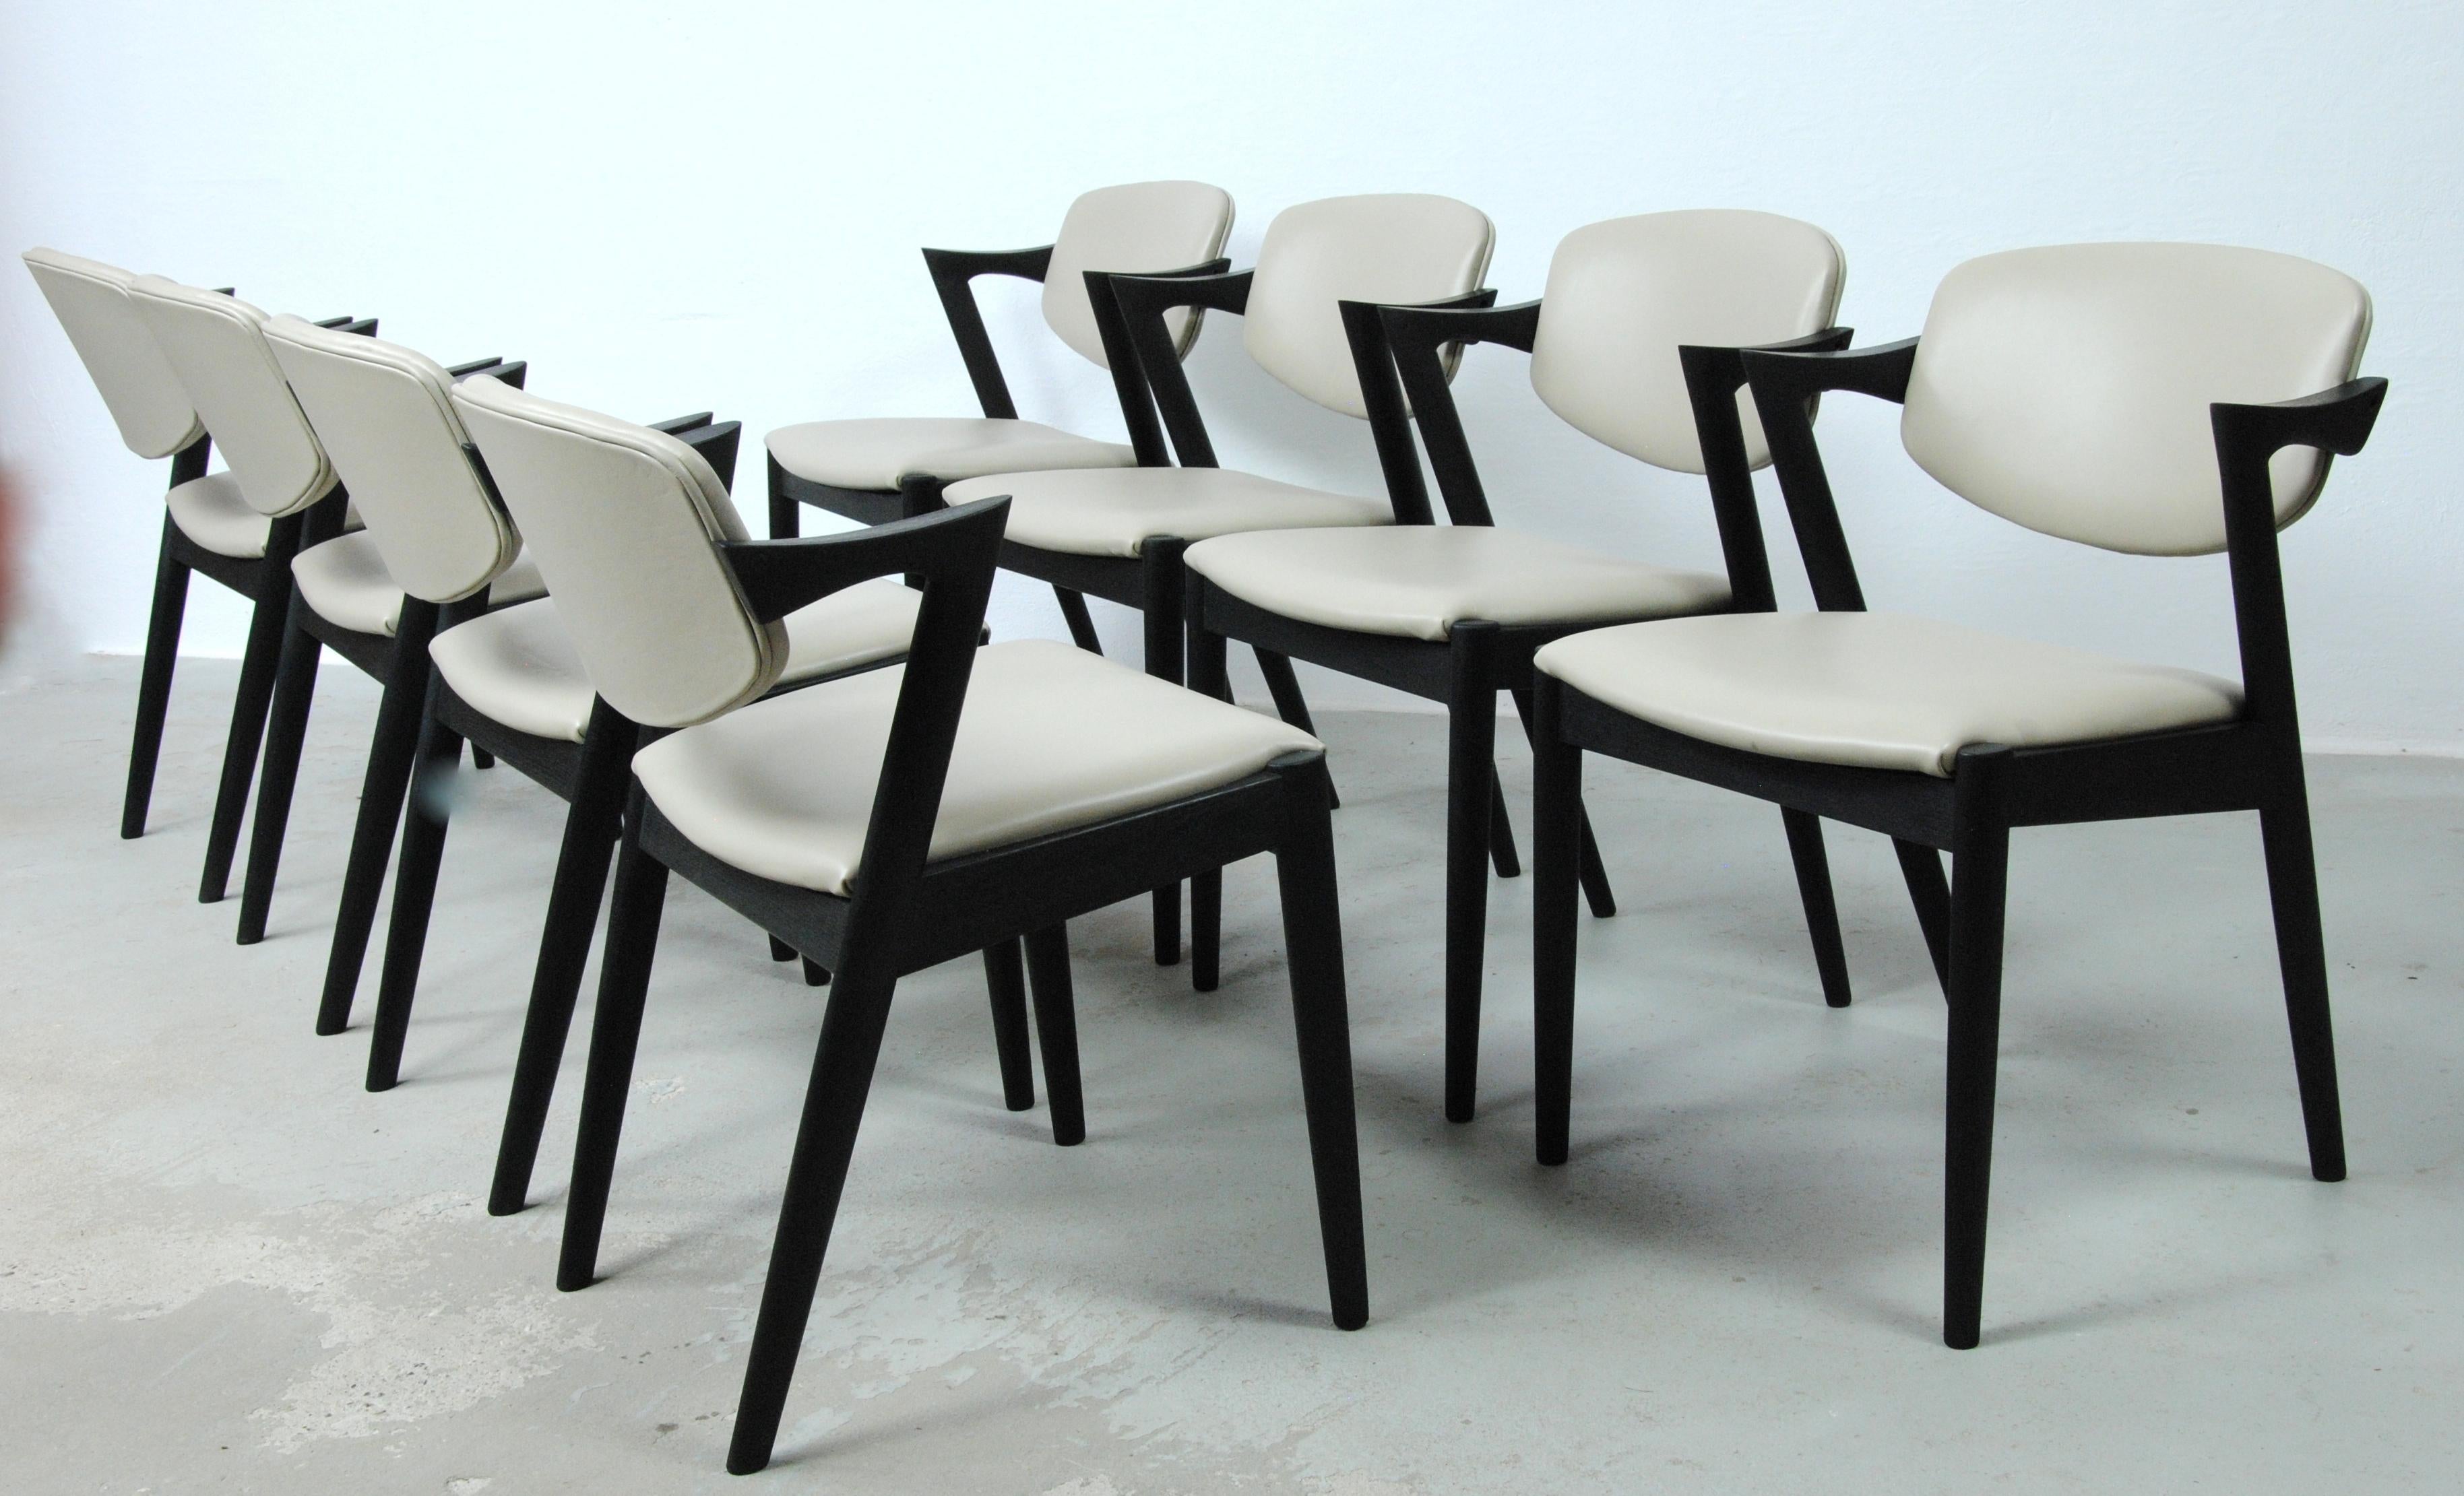 Set of 8 fully restored and ebonized model 42 oak dining chairs with swivel backrests by Kai Kristiansen for Schous Møbelfabrik., 

The chairs have Kai Kristiansen’s typical light and elegant design that make them fit in easily where you want them